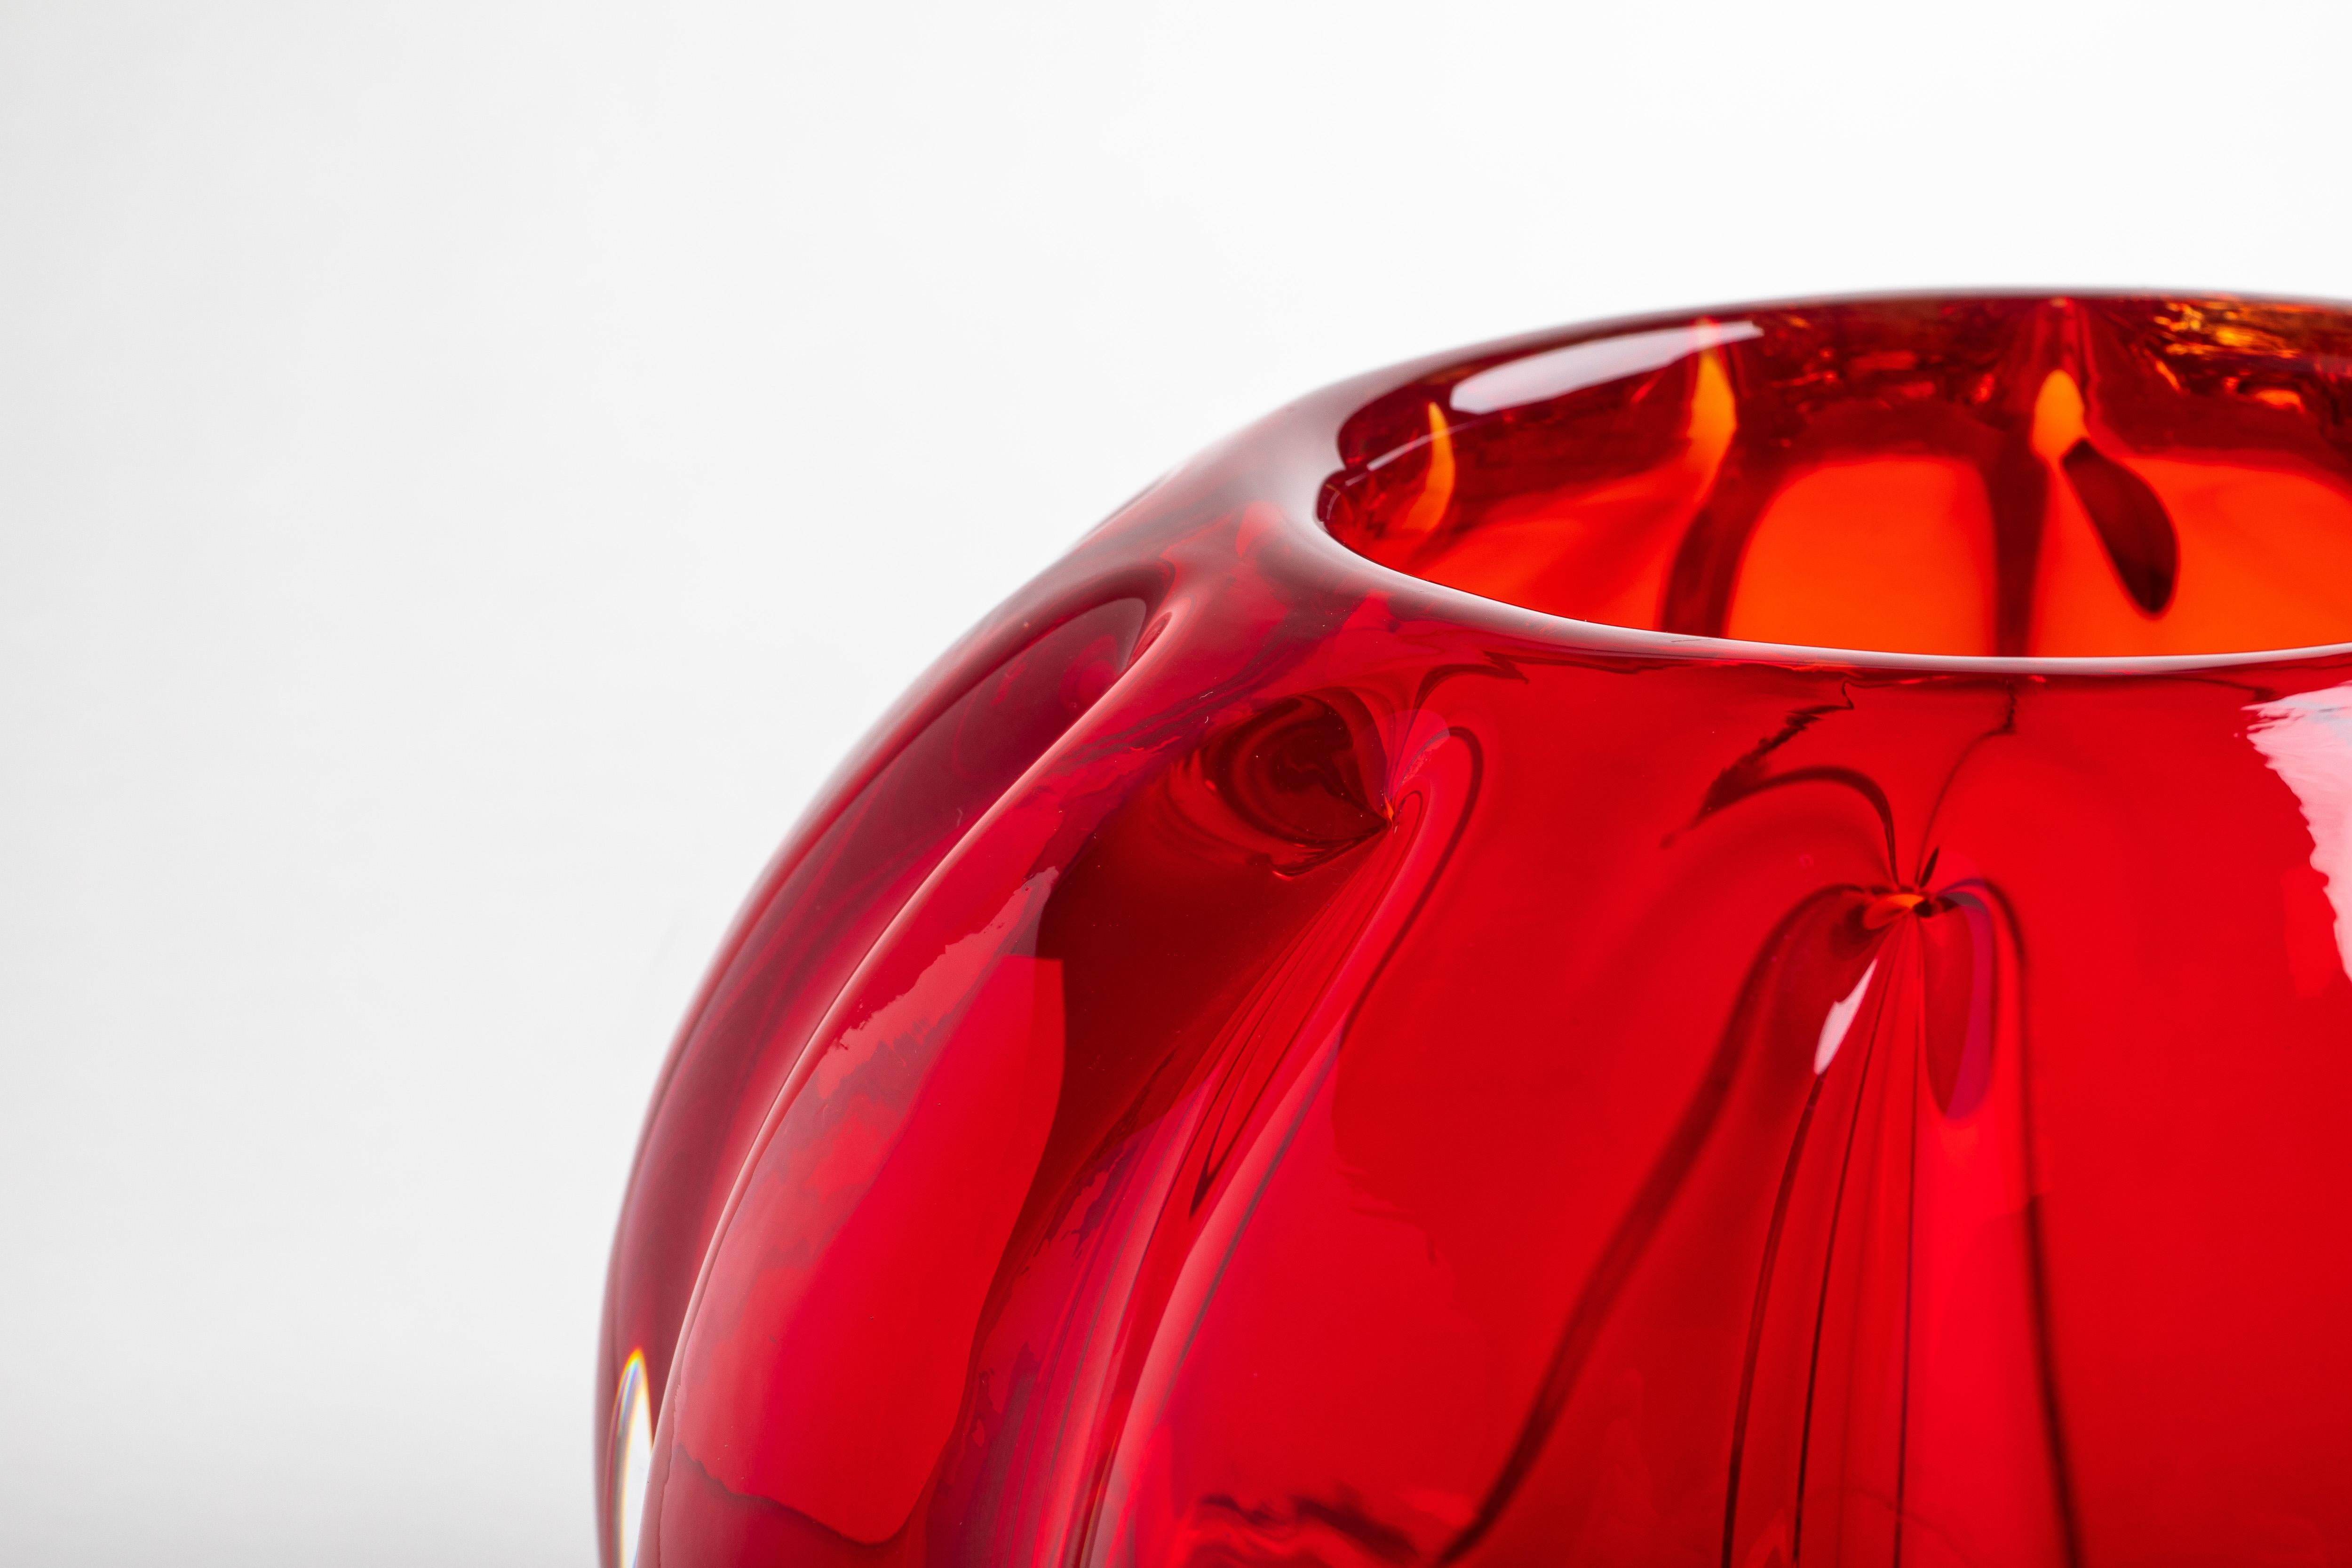 He Fiori Bolla vase is hand blown in Murano using the Costa Dritta technique which produces a ribbed
effect on the outside of the glass. Each Yali piece is handcrafted and signed. Sizes and shapes vary slightly, and subtle markings and small air